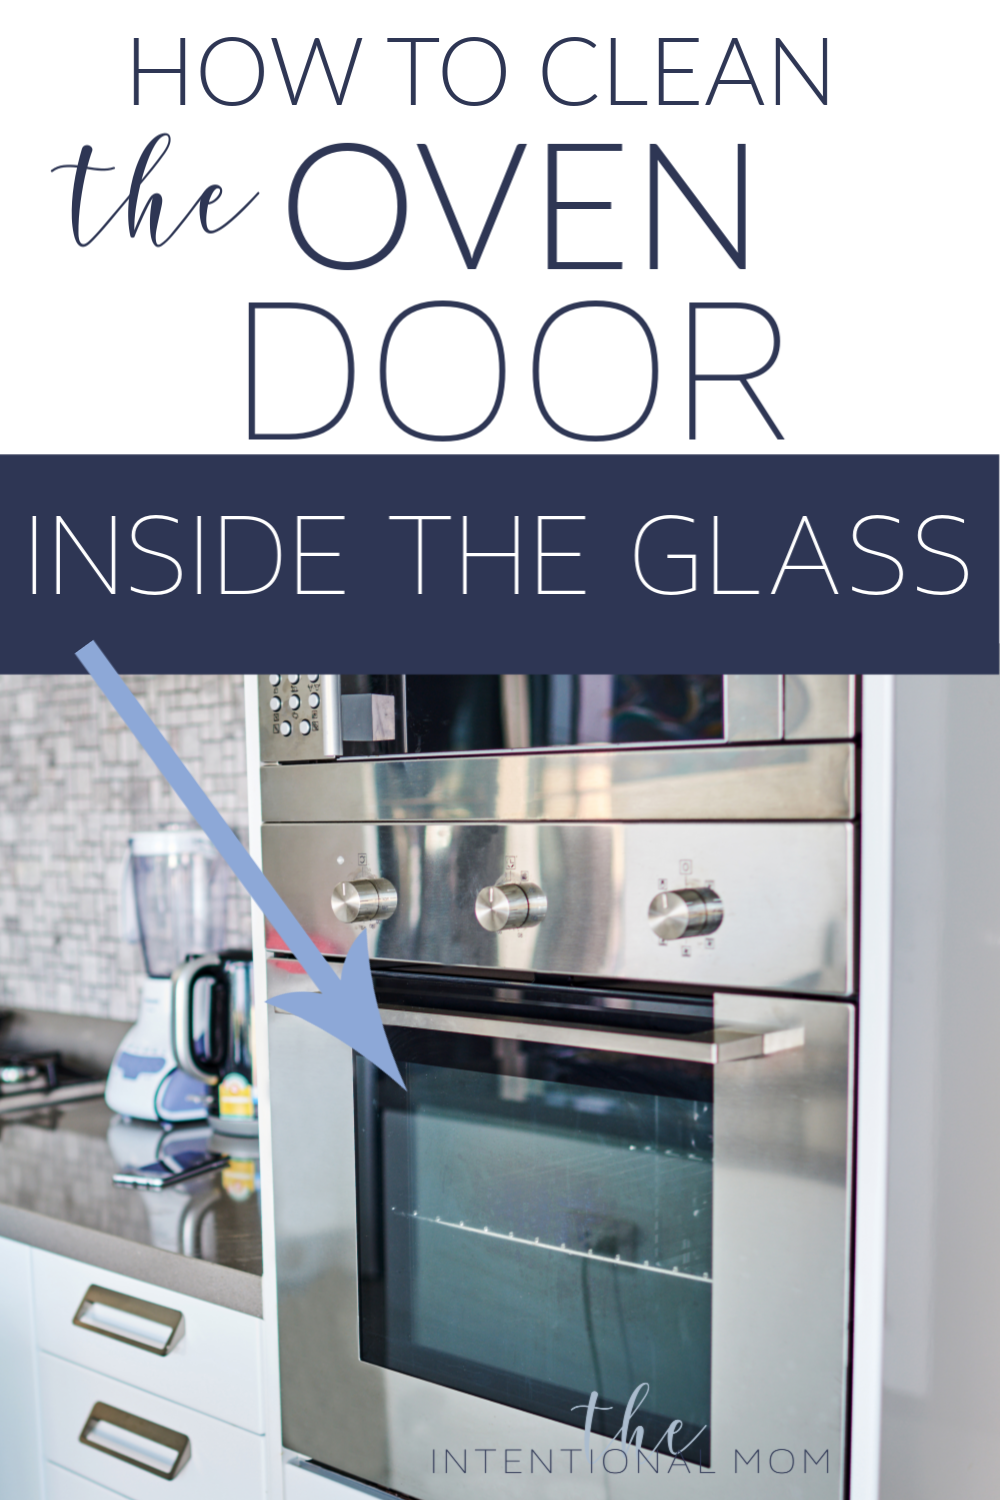 How to Clean The Glass Oven Door – Inside the Glass!